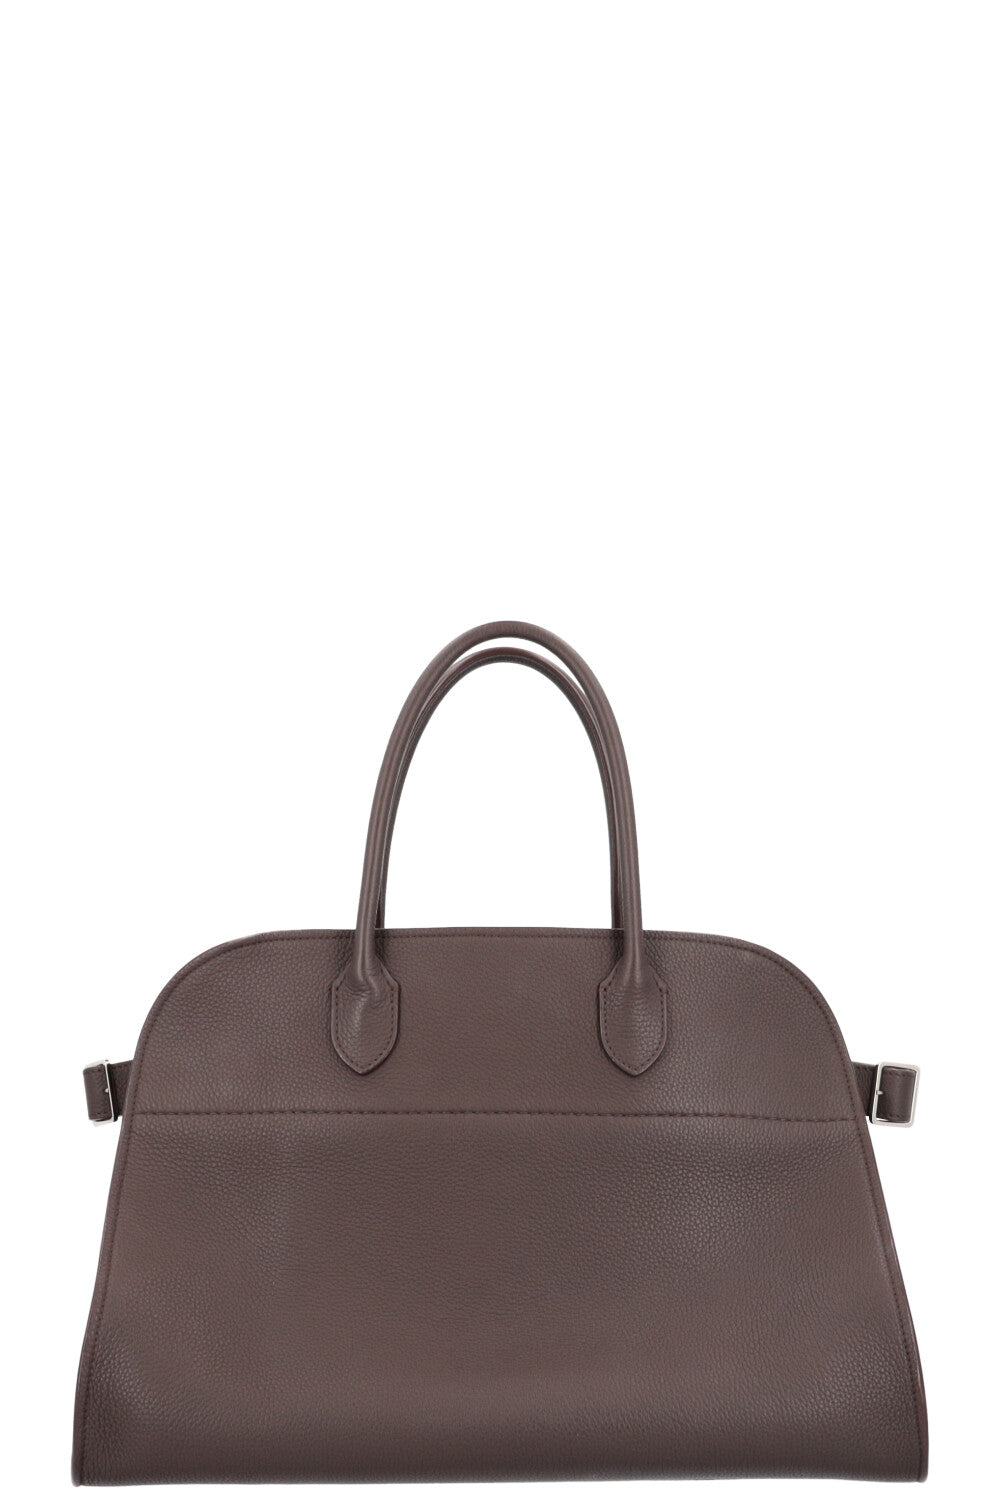 The Row Margaux 17 Large Brown